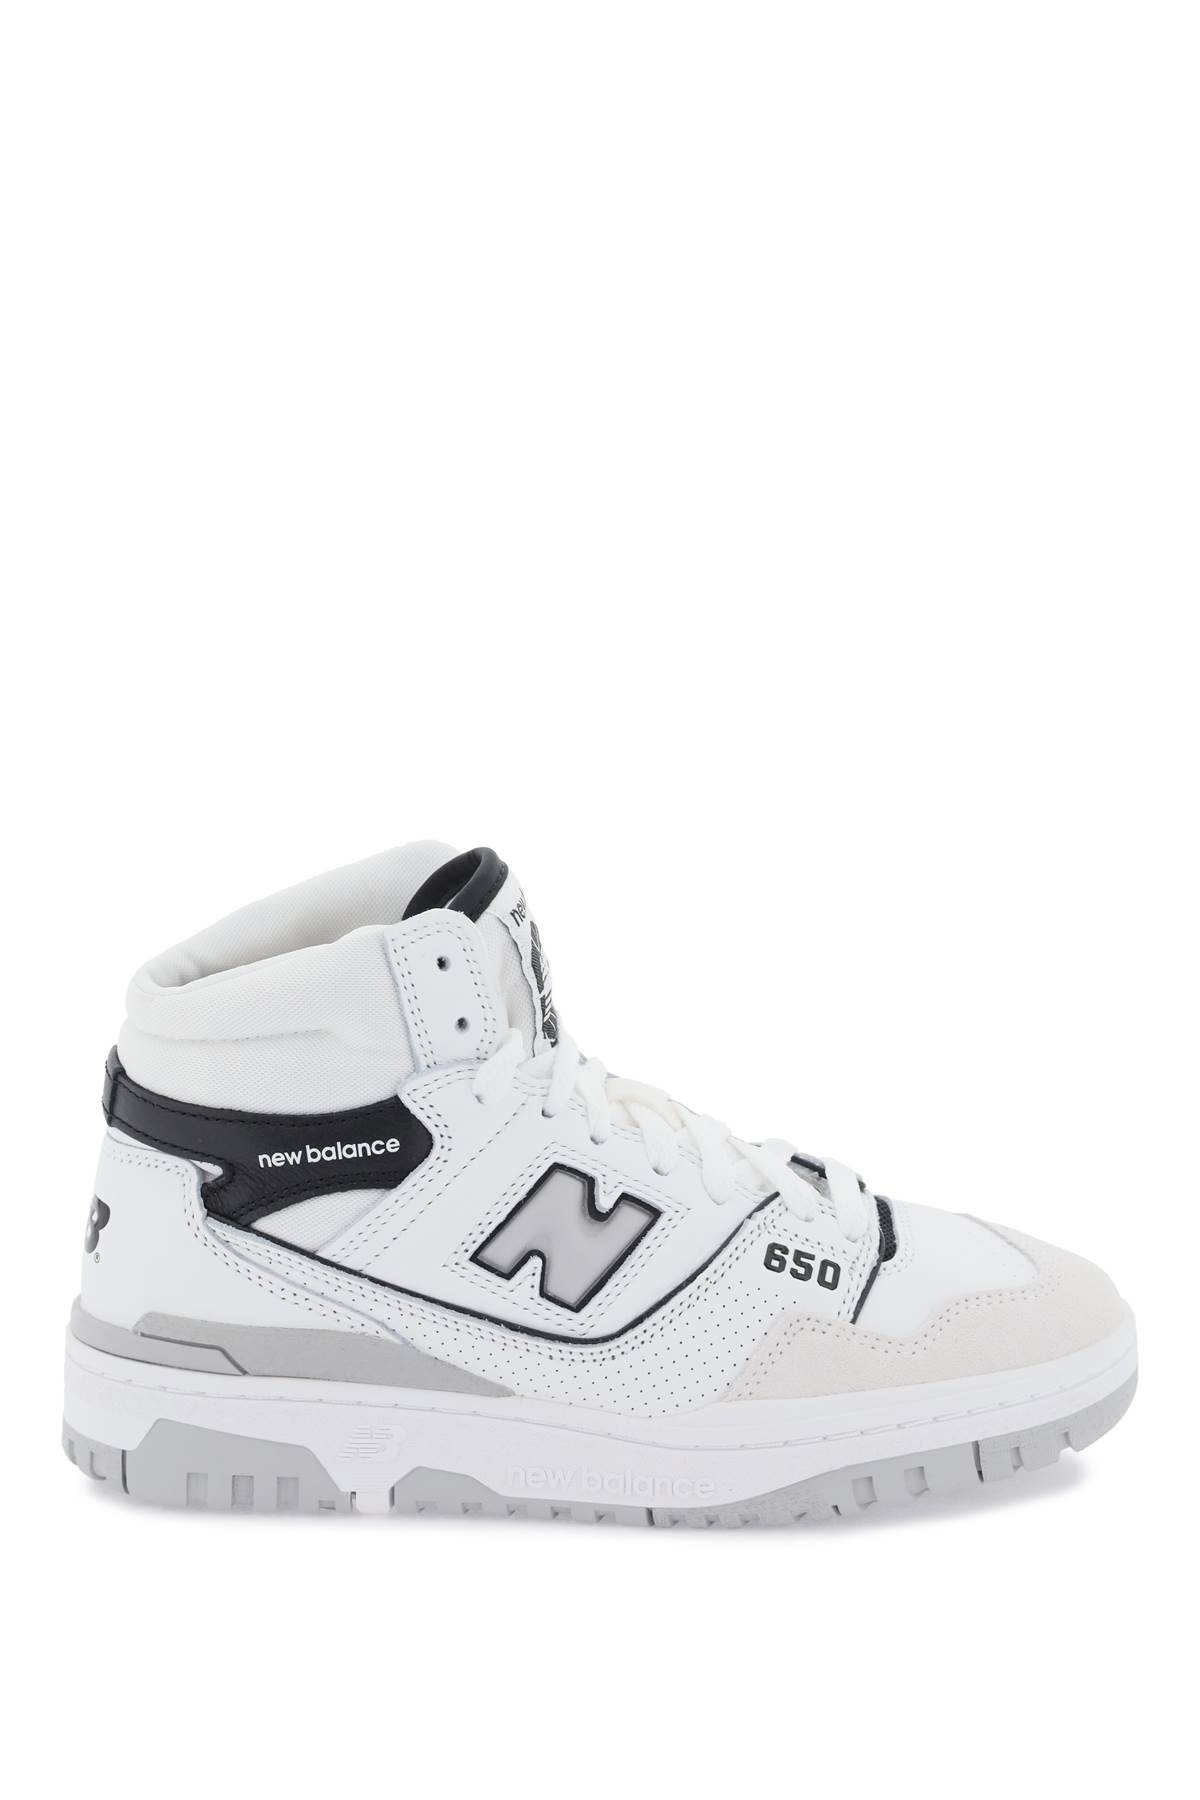 New Balance 650 Sneakers In White Black (white)